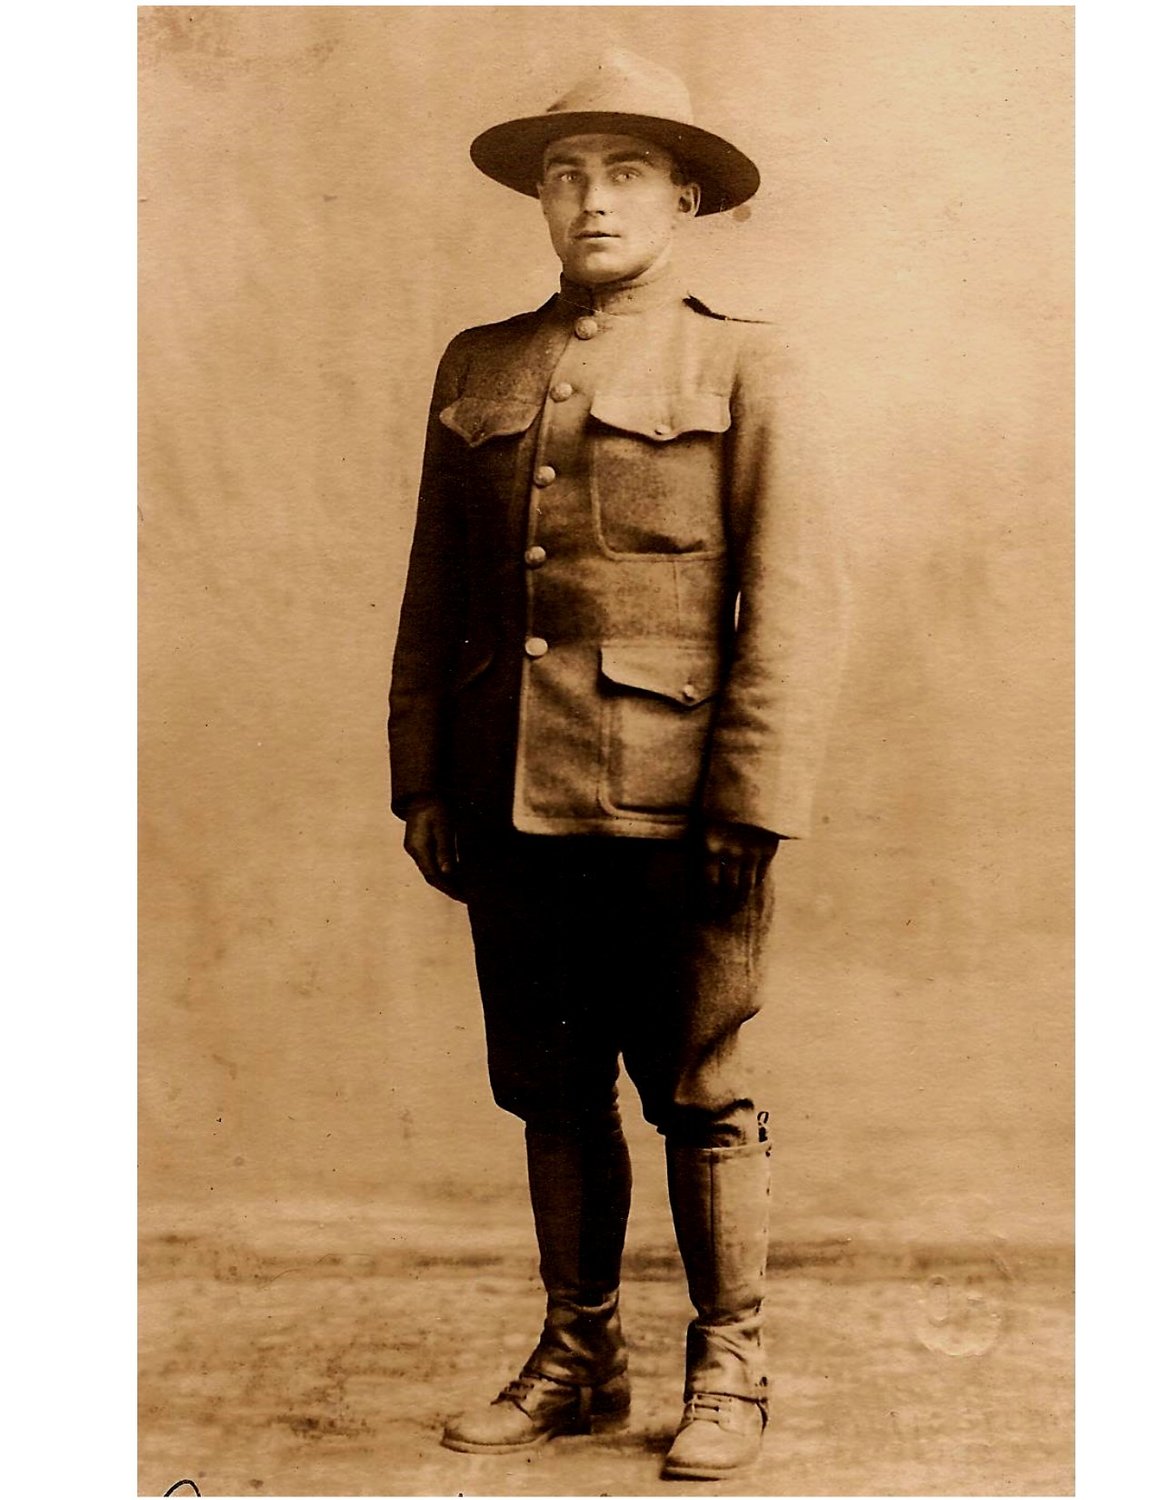 Andrew J. Wiest, Sgt. MT CO 397th Infantry from Neversink, NY. He died overseas on October 11, 1918...